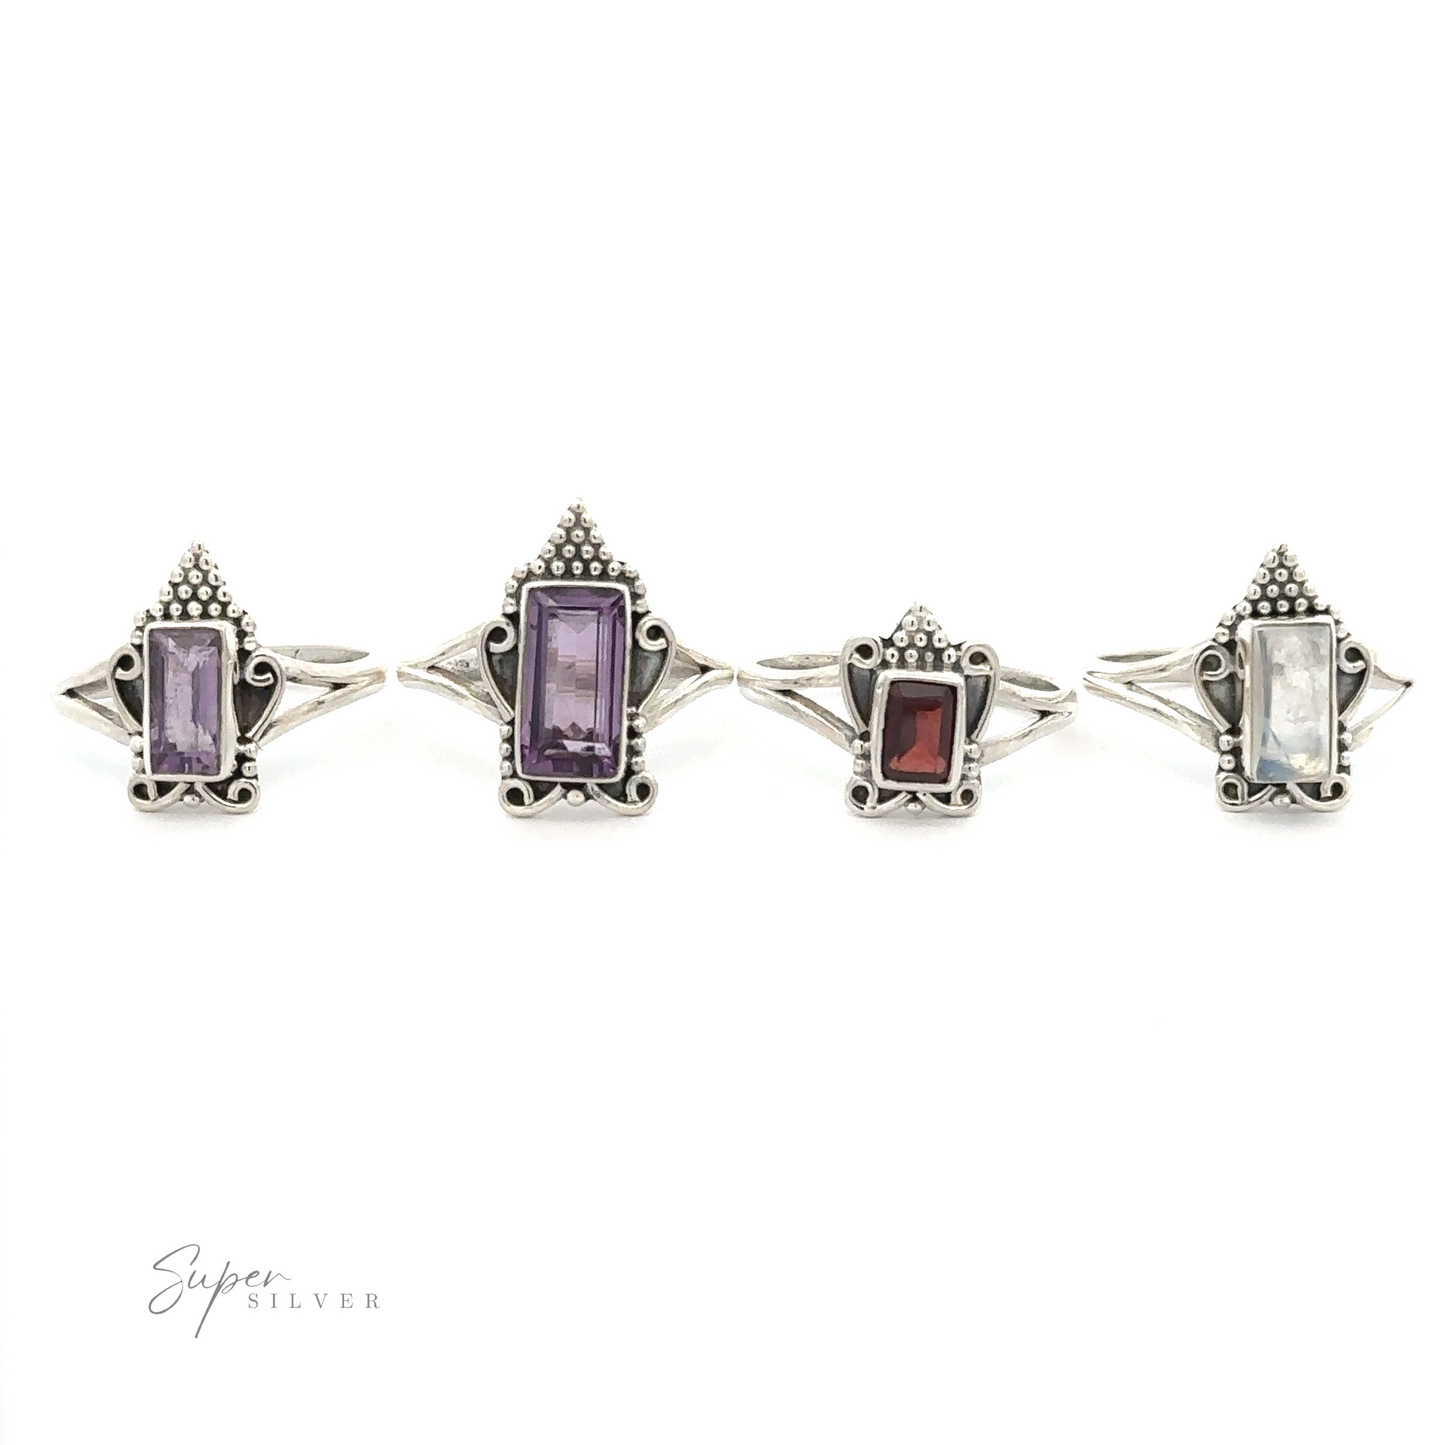 Four Bohemian Princess Rings with rectangular gemstones, including an amethyst and moonstone, in various colors displayed in a line on a white background. The gemstones are purple, dark purple, red, and clear. Perfect for adding a touch of Boho-style princess charm to any outfit.